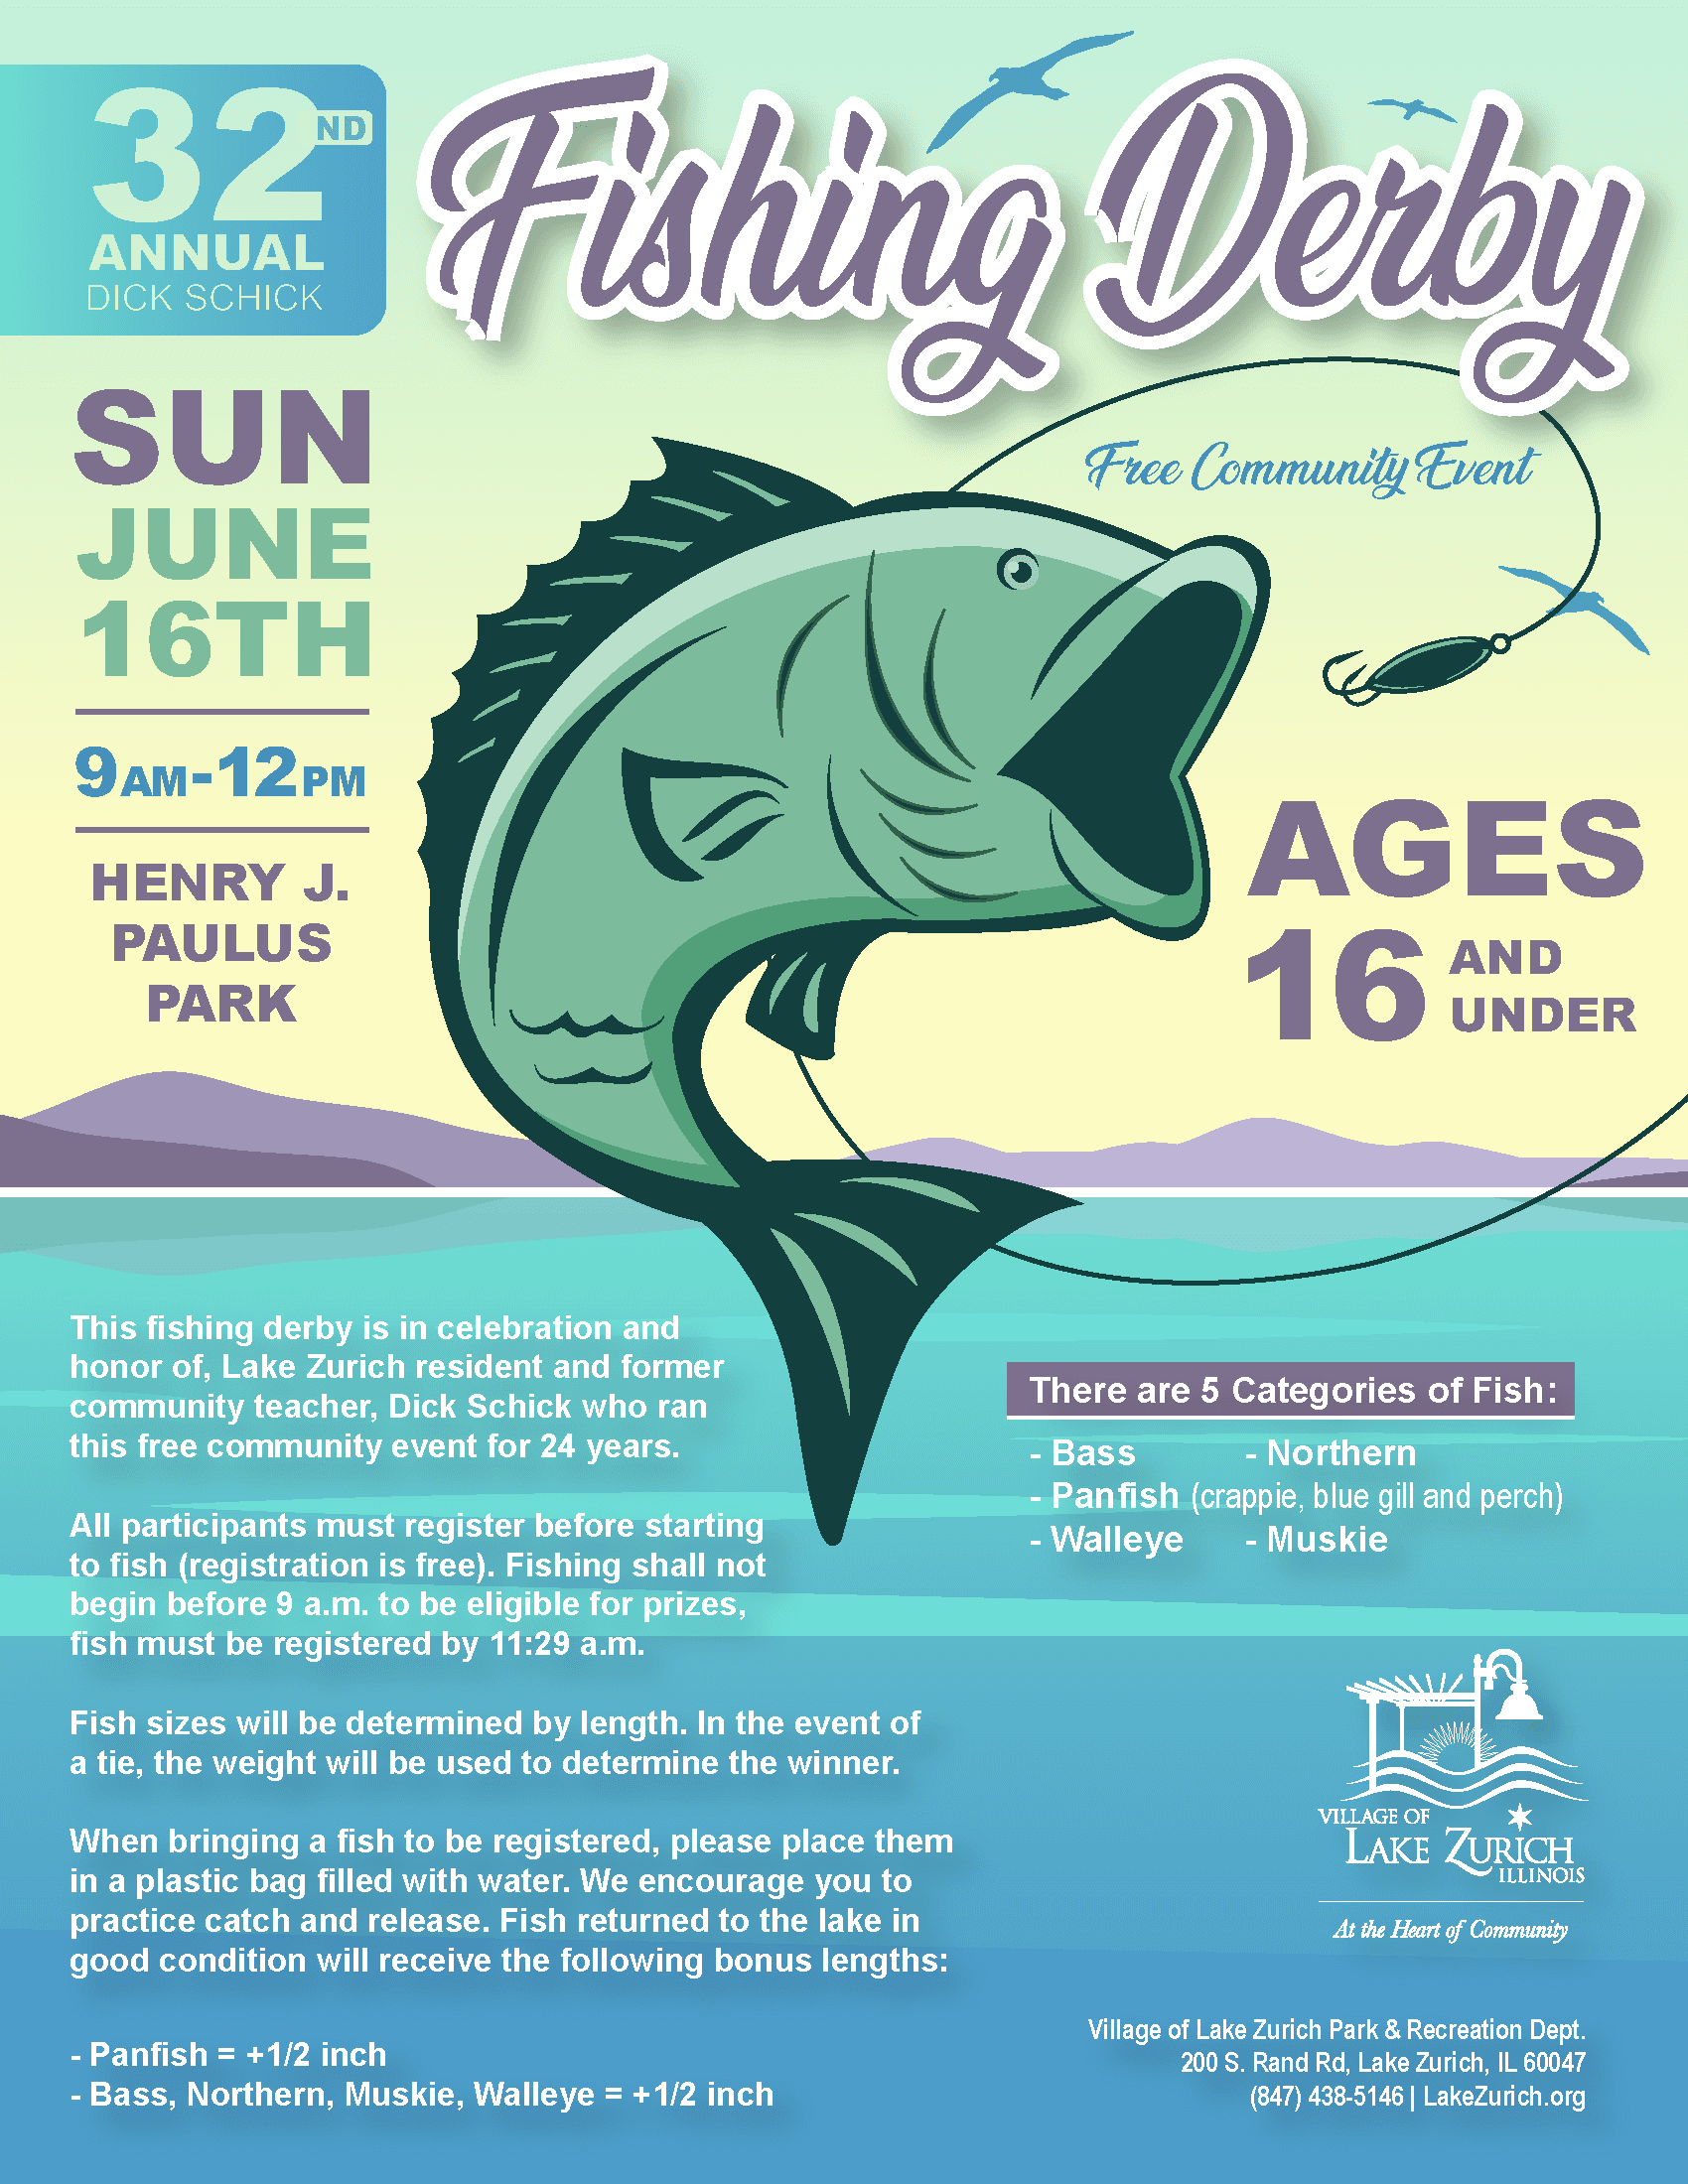 Dick Schick's Annual Fishing Derby